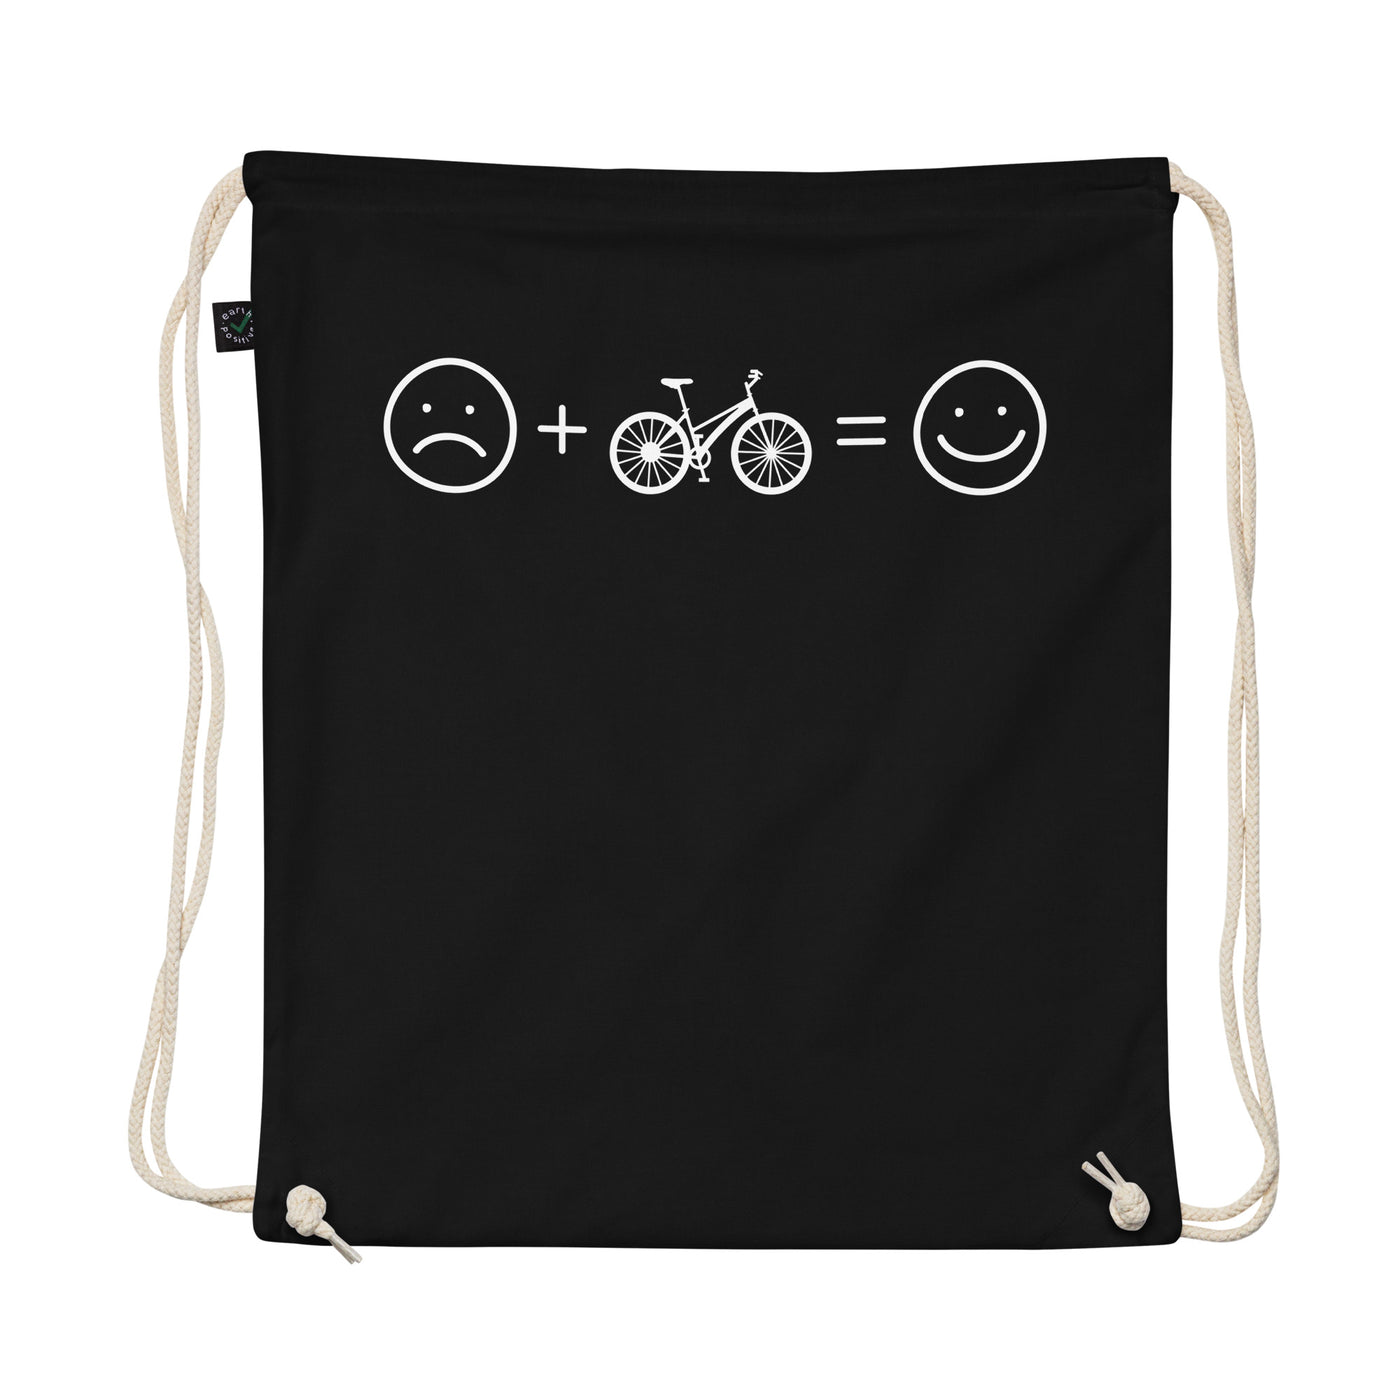 Smile Face And Bicycle - Organic Turnbeutel fahrrad